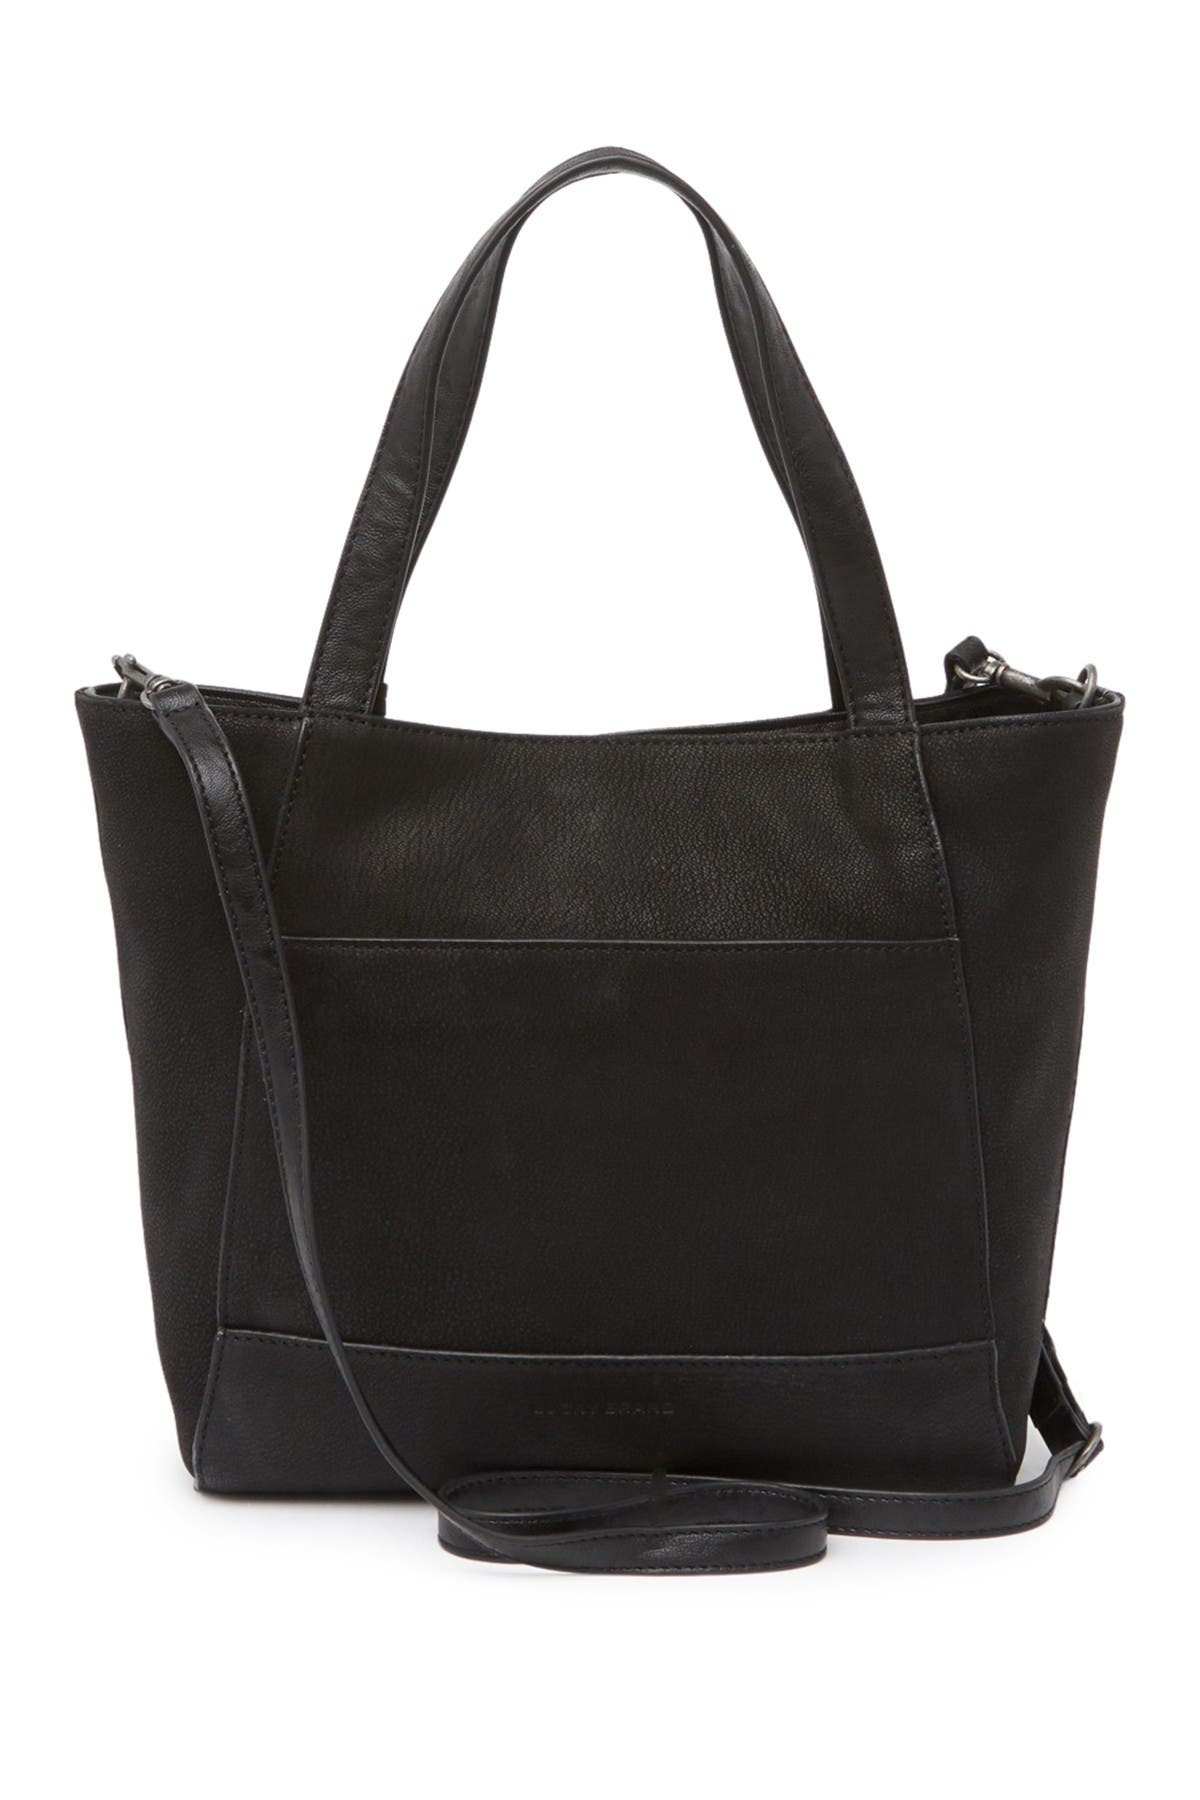 Lucky Brand | Don Leather Tote Bag | Nordstrom Rack